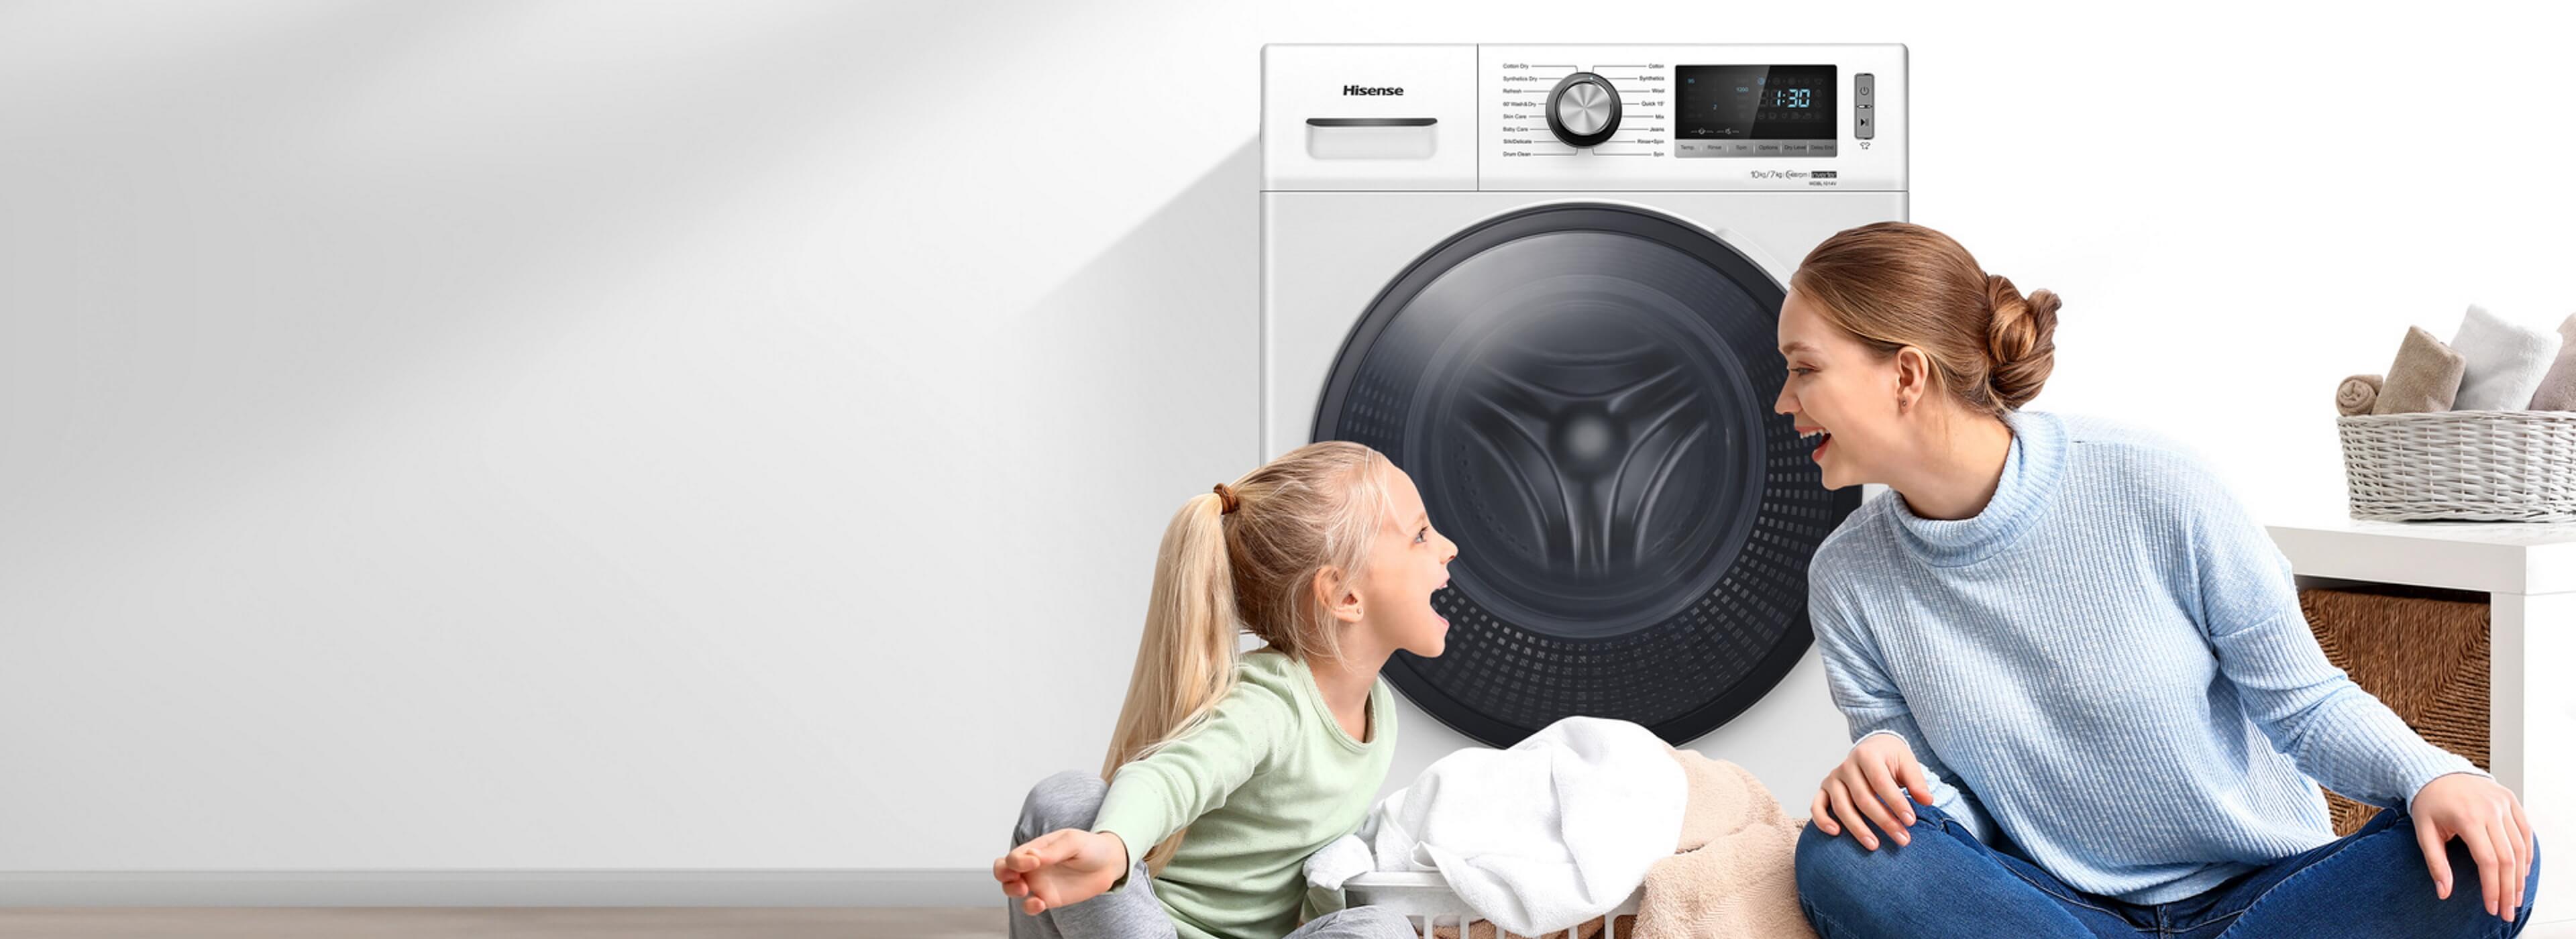 RS_Hisense_Washing_Category_banner-3840x1400-compressed.jpg